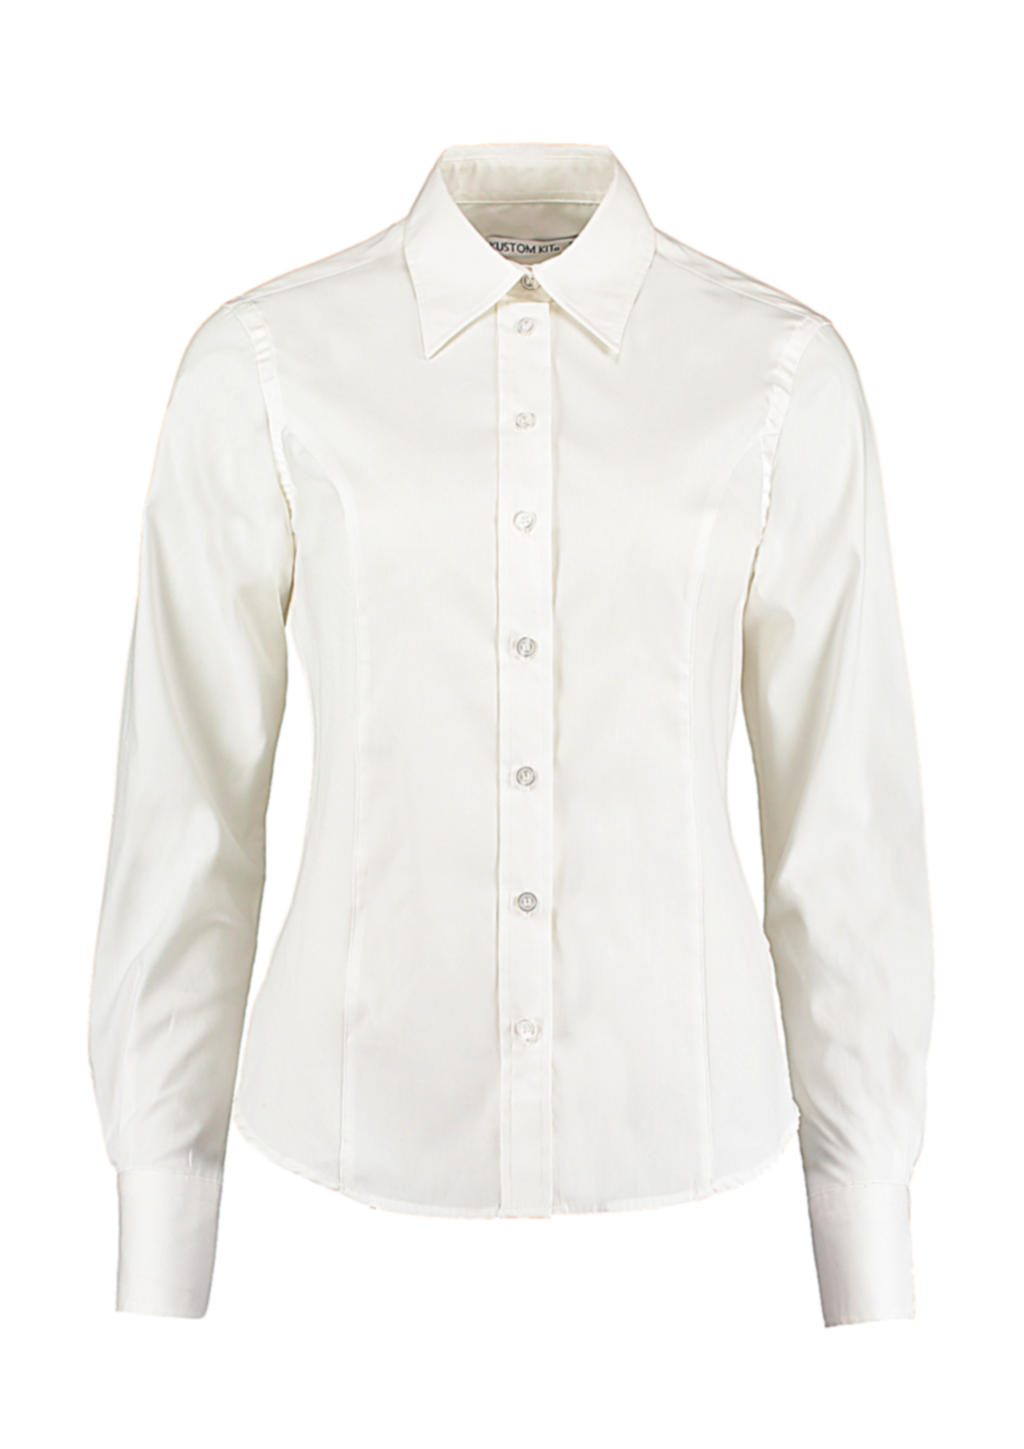  Womens Tailored Fit Premium Oxford Shirt in Farbe White